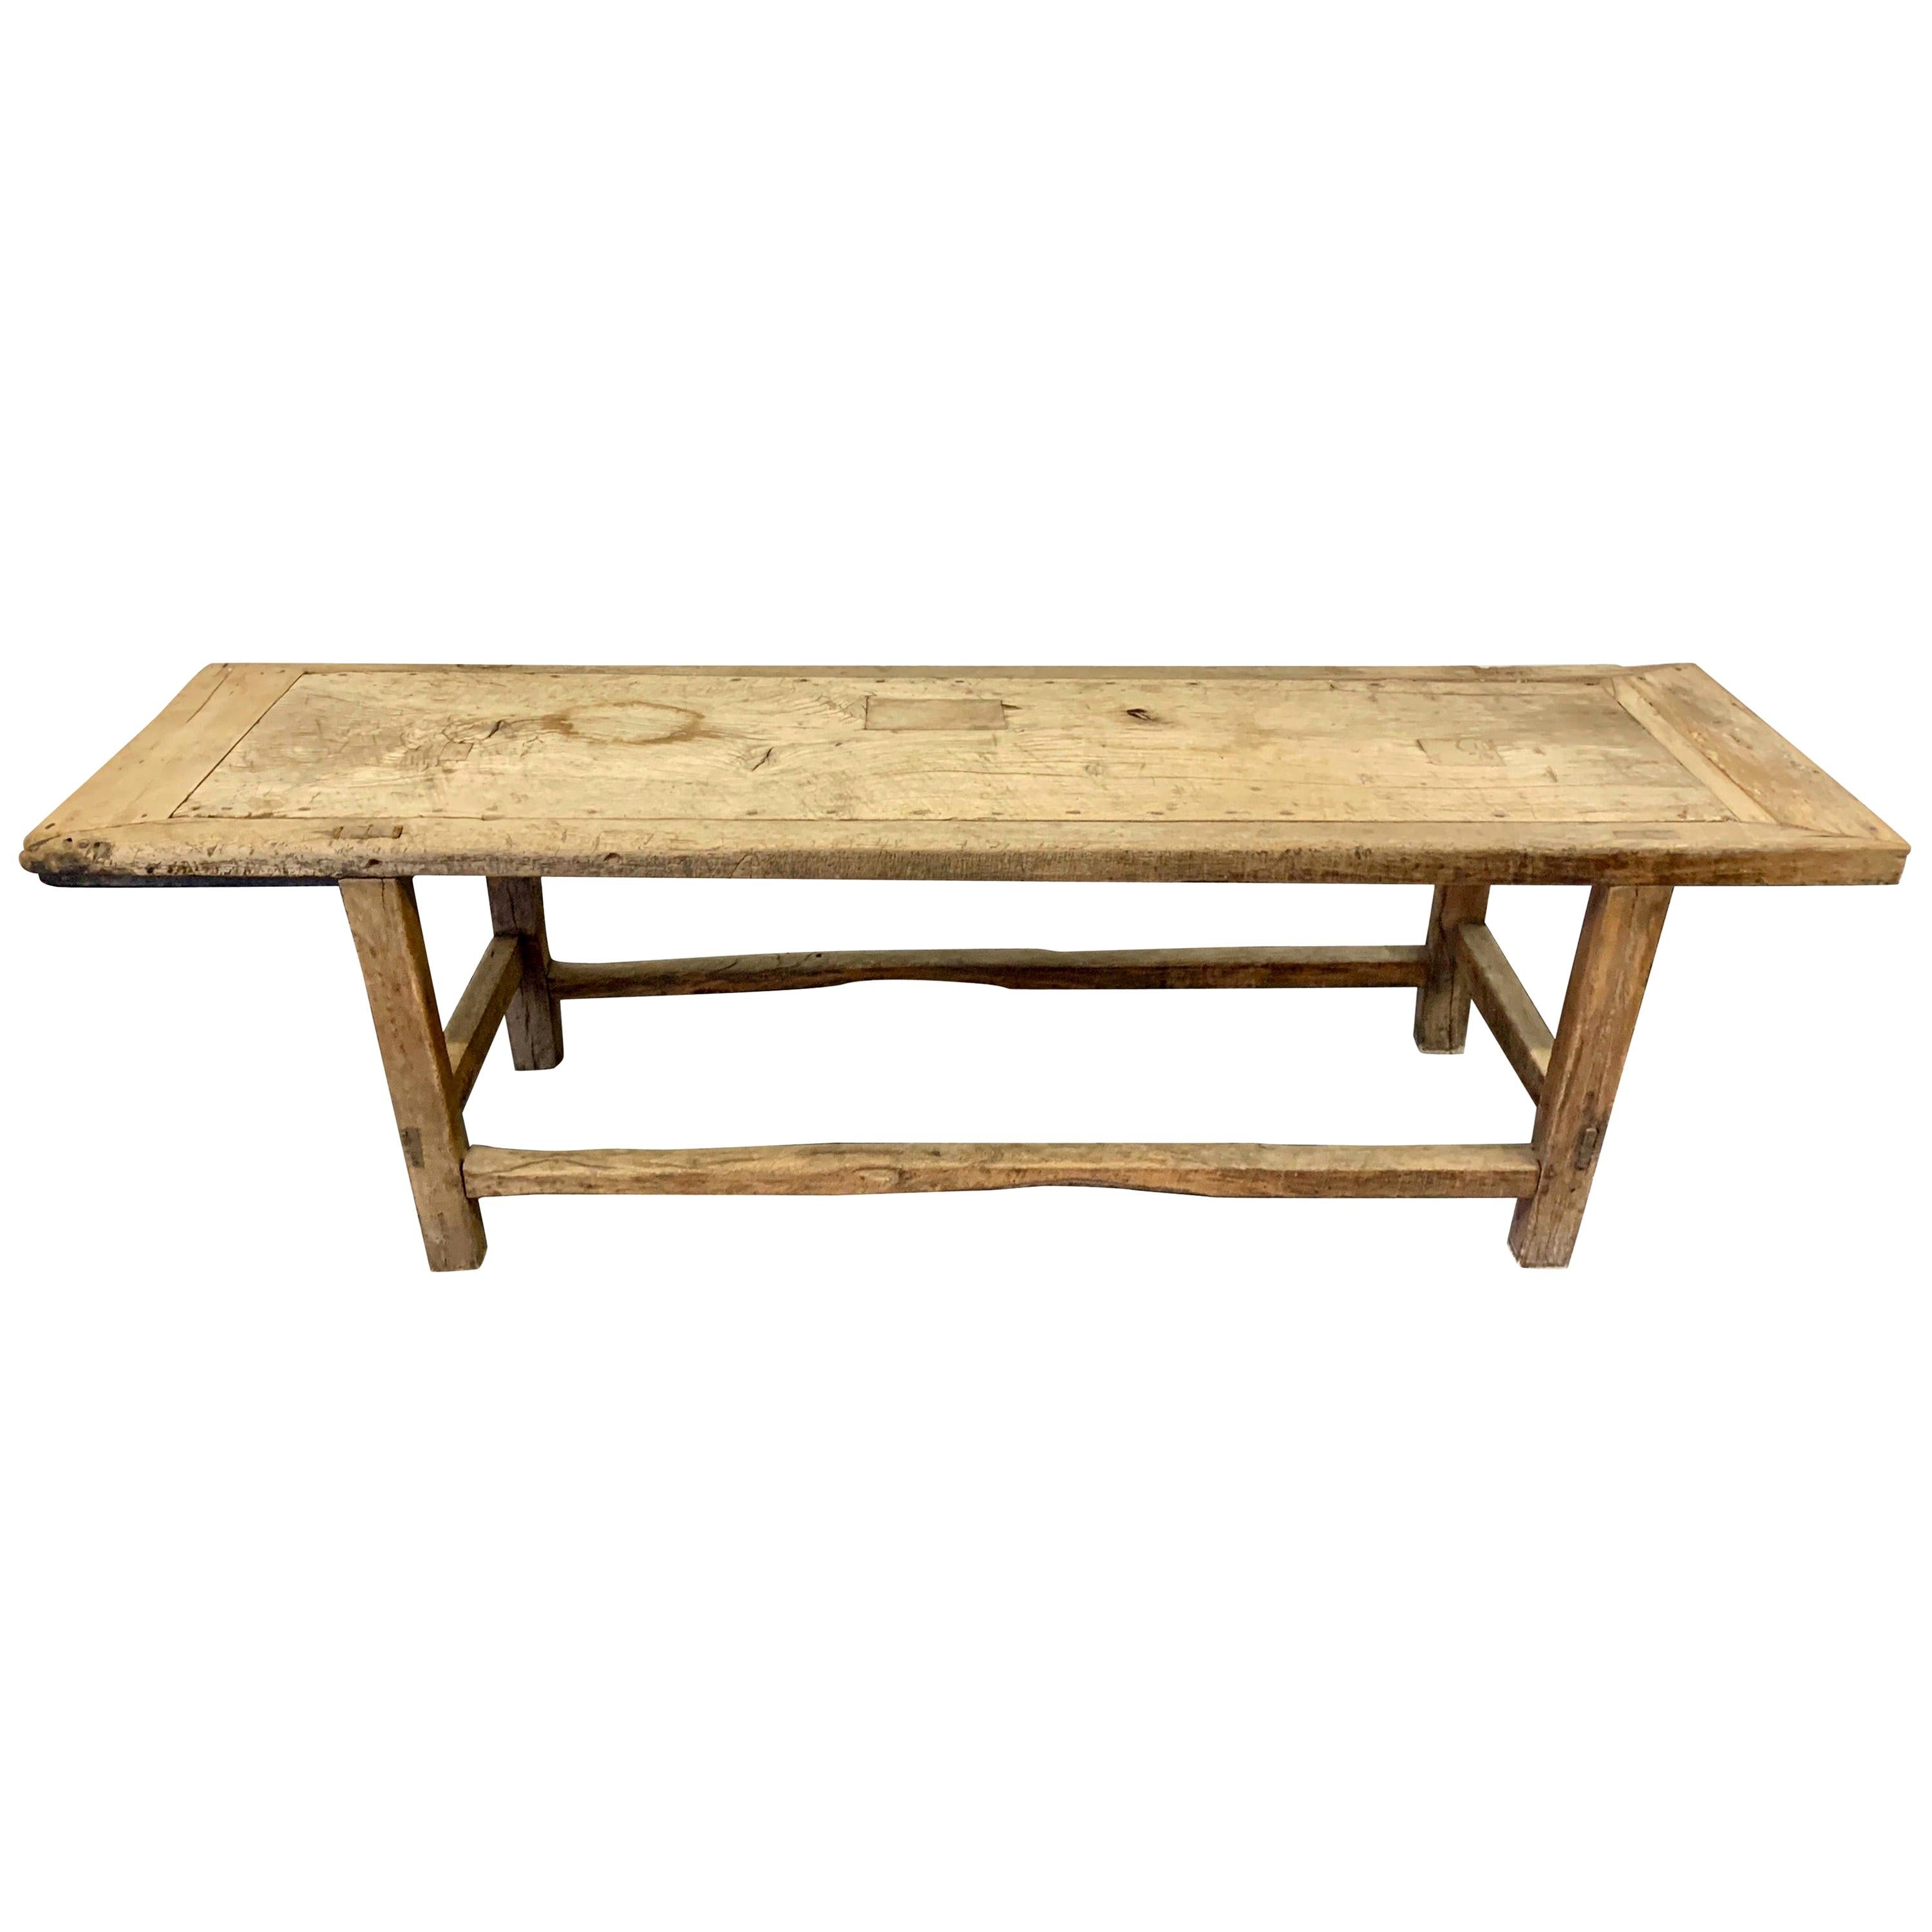 18th Century French Work or Farm Table